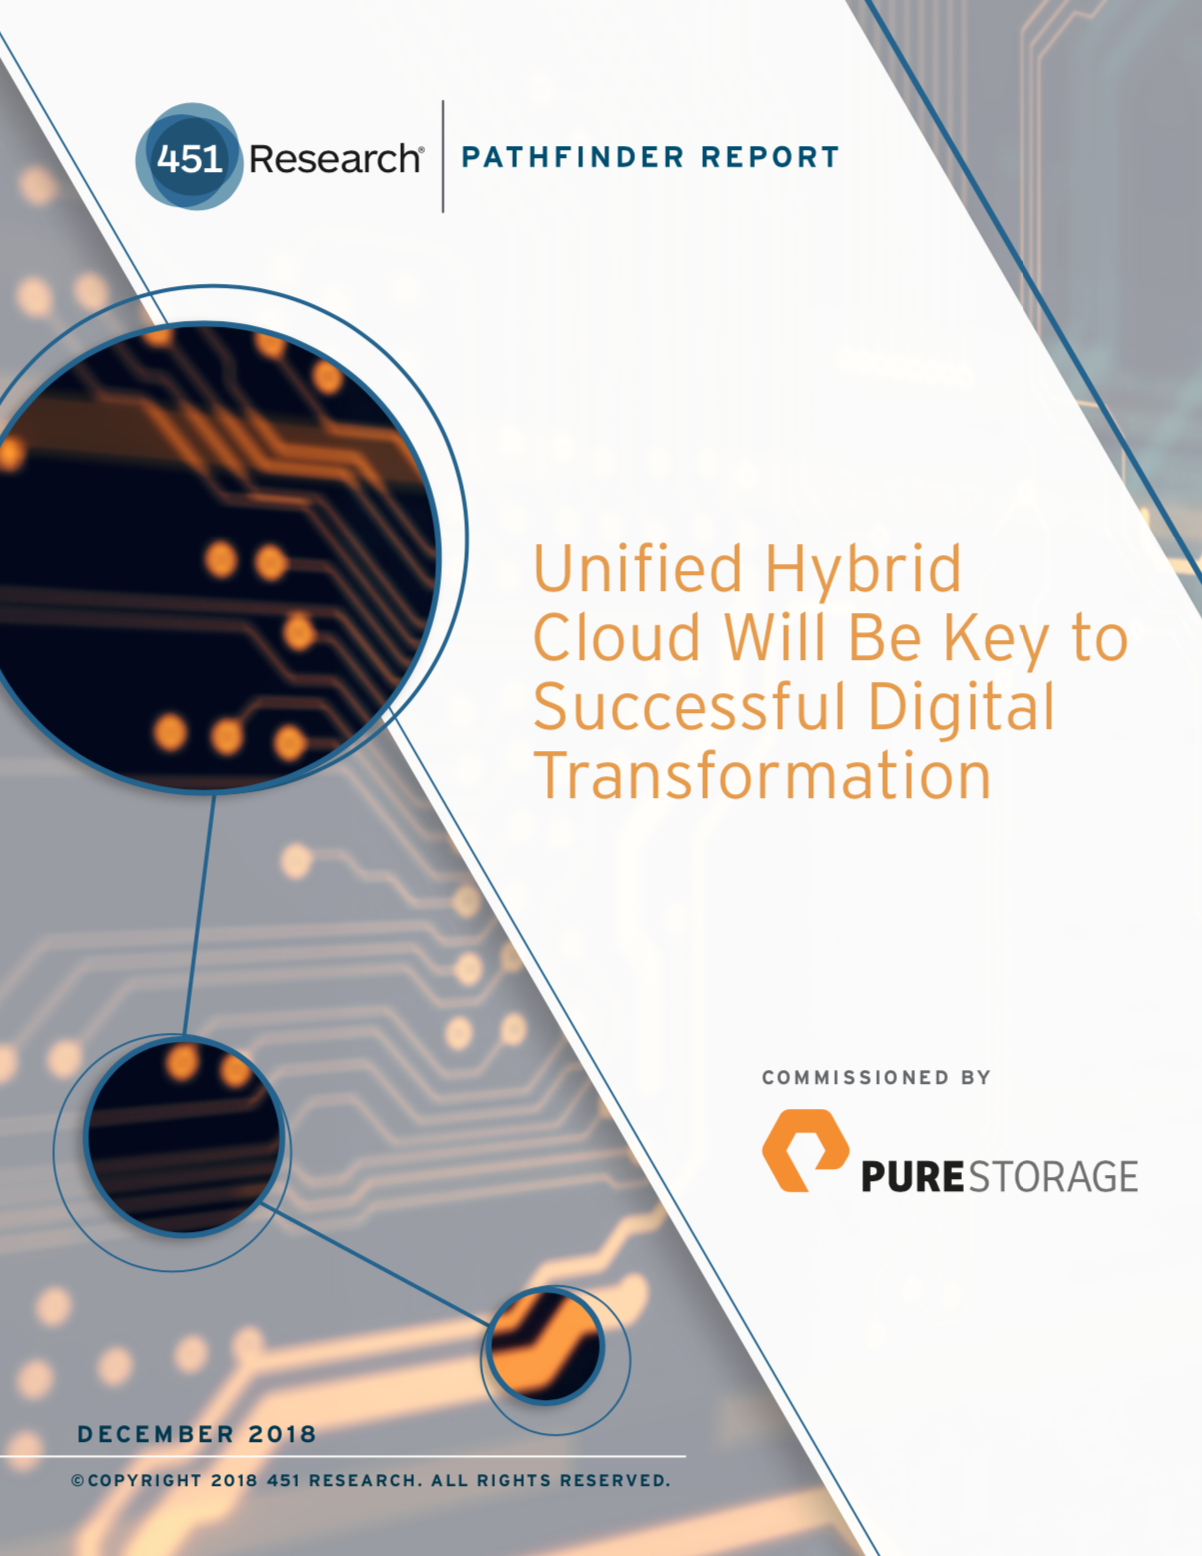 Unified Hybrid Cloud Will Be Key to Successful Digital Transformation